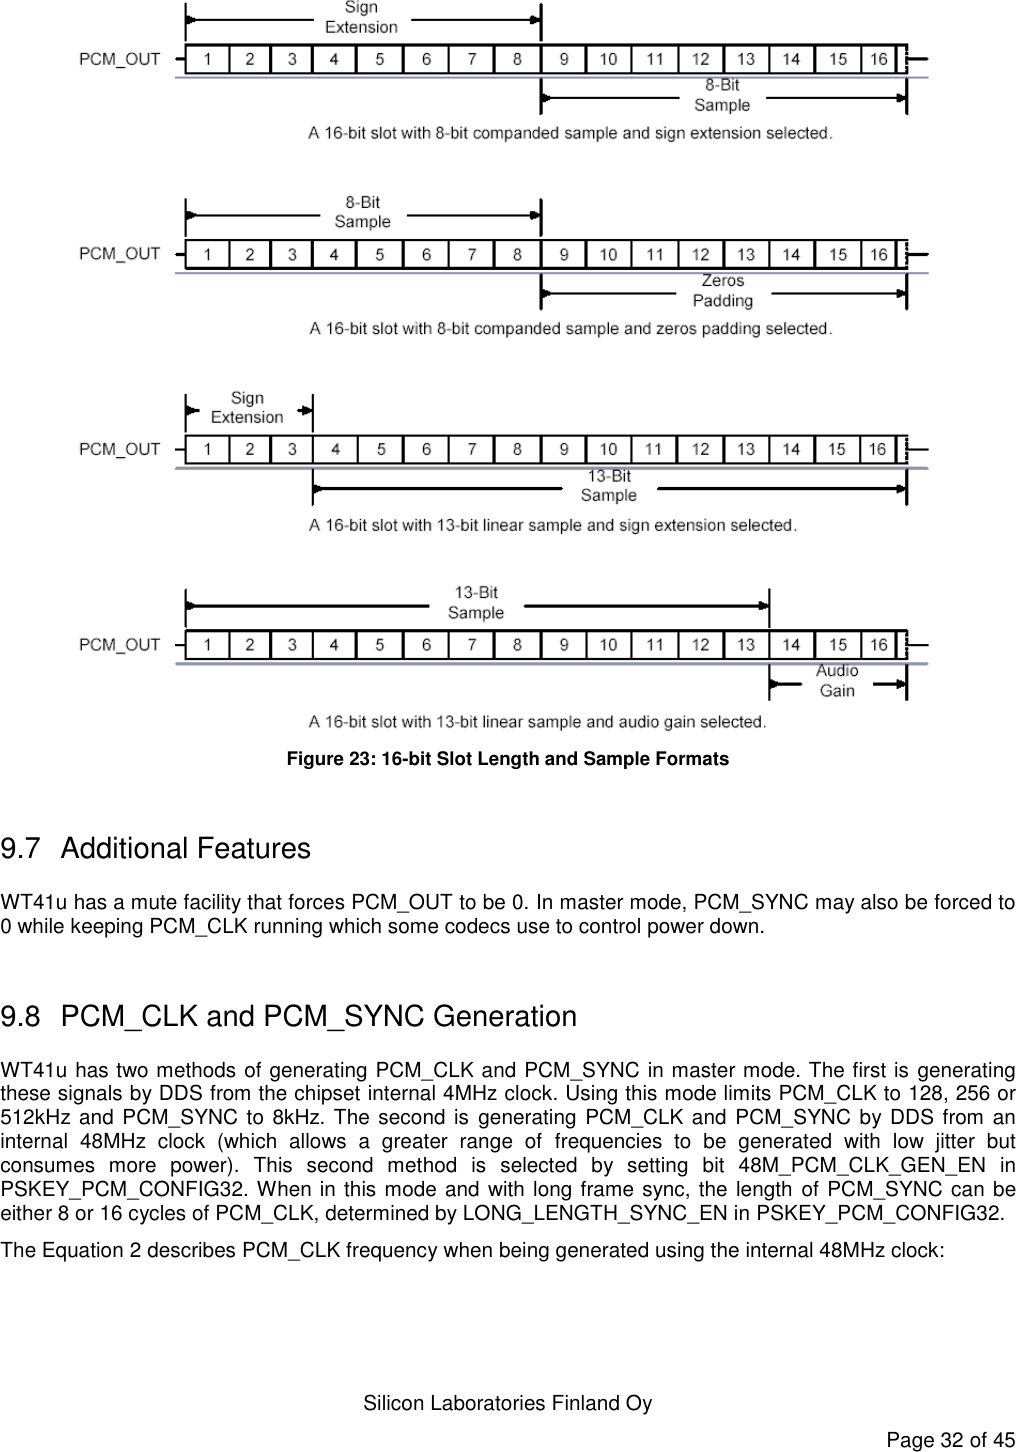   Silicon Laboratories Finland Oy Page 32 of 45  Figure 23: 16-bit Slot Length and Sample Formats  9.7  Additional Features WT41u has a mute facility that forces PCM_OUT to be 0. In master mode, PCM_SYNC may also be forced to 0 while keeping PCM_CLK running which some codecs use to control power down.  9.8  PCM_CLK and PCM_SYNC Generation WT41u has two methods of generating PCM_CLK and PCM_SYNC in master mode. The first is generating these signals by DDS from the chipset internal 4MHz clock. Using this mode limits PCM_CLK to 128, 256 or 512kHz and PCM_SYNC to 8kHz. The second is generating PCM_CLK and  PCM_SYNC by DDS from an internal  48MHz  clock  (which  allows  a  greater  range  of  frequencies  to  be  generated  with  low  jitter  but consumes  more  power).  This  second  method  is  selected  by  setting  bit  48M_PCM_CLK_GEN_EN  in PSKEY_PCM_CONFIG32. When in this mode and with long frame sync, the length of PCM_SYNC can be either 8 or 16 cycles of PCM_CLK, determined by LONG_LENGTH_SYNC_EN in PSKEY_PCM_CONFIG32. The Equation 2 describes PCM_CLK frequency when being generated using the internal 48MHz clock:  